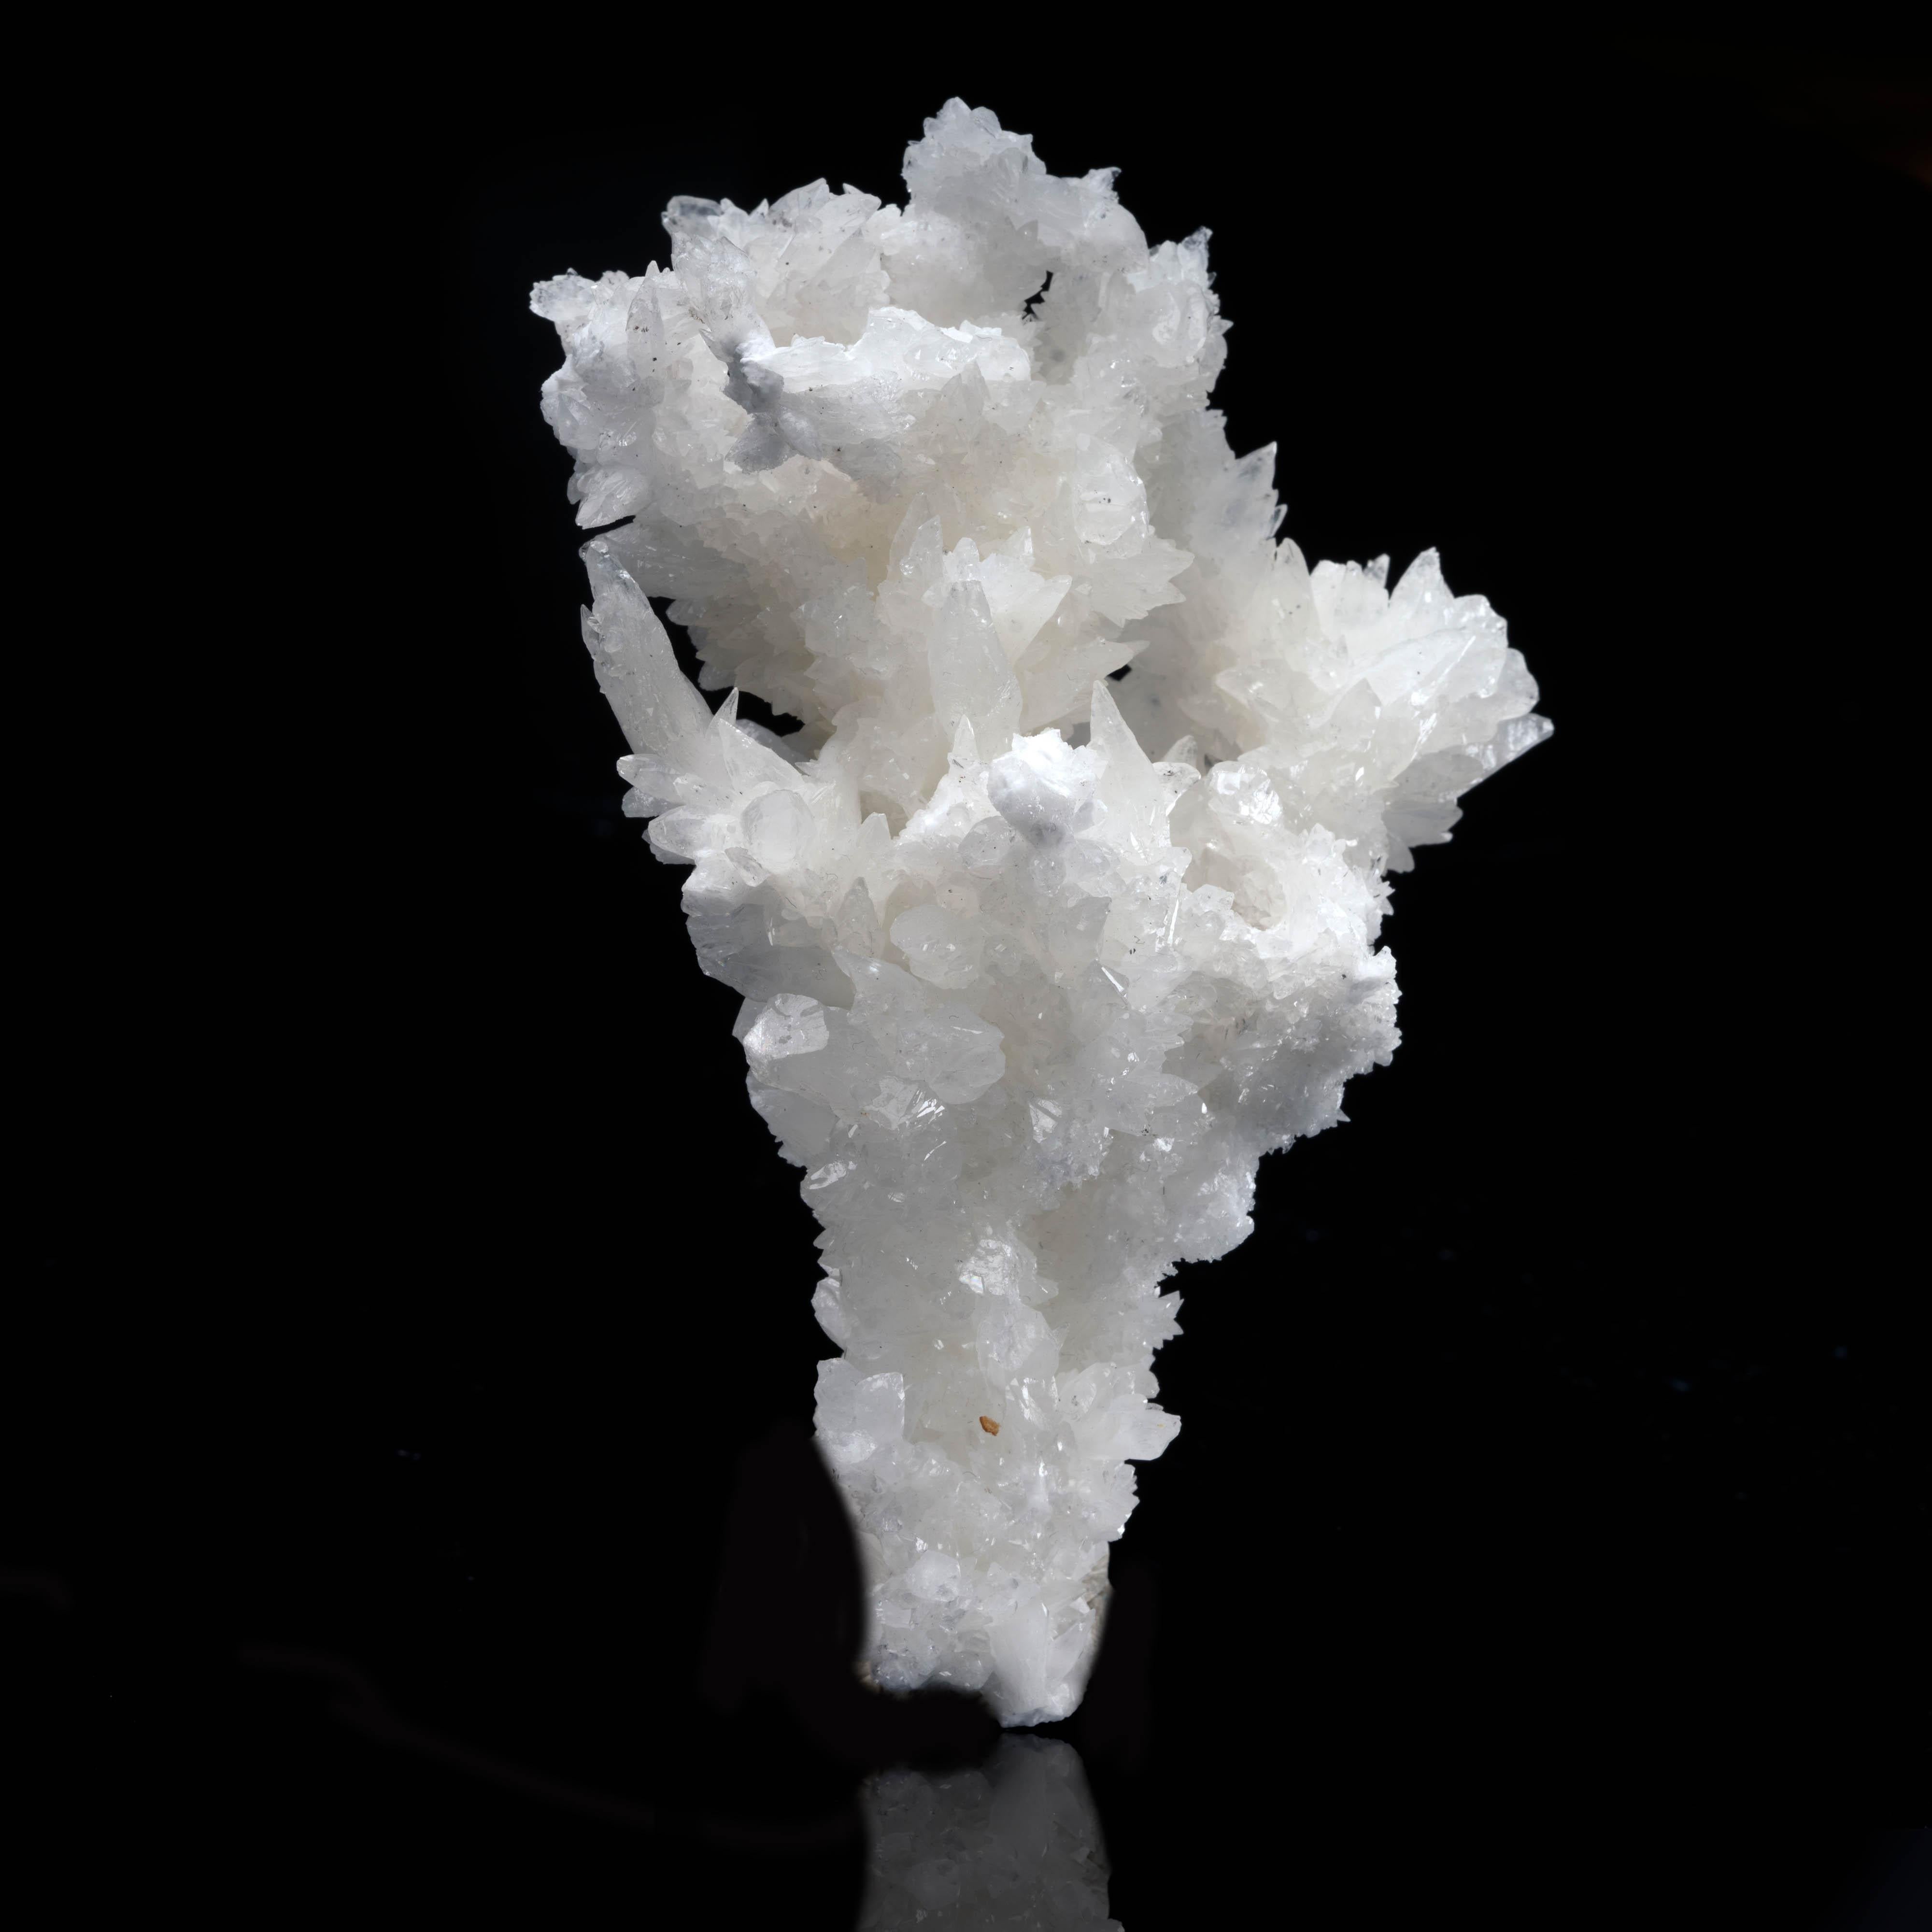 This formation of extremely lustrous, sharp calcite crystals from China features one type of calcite atop another, texturally contrasting species of calcite in a stalactitic formation that creates a tree-like structure. A sparkling and unique